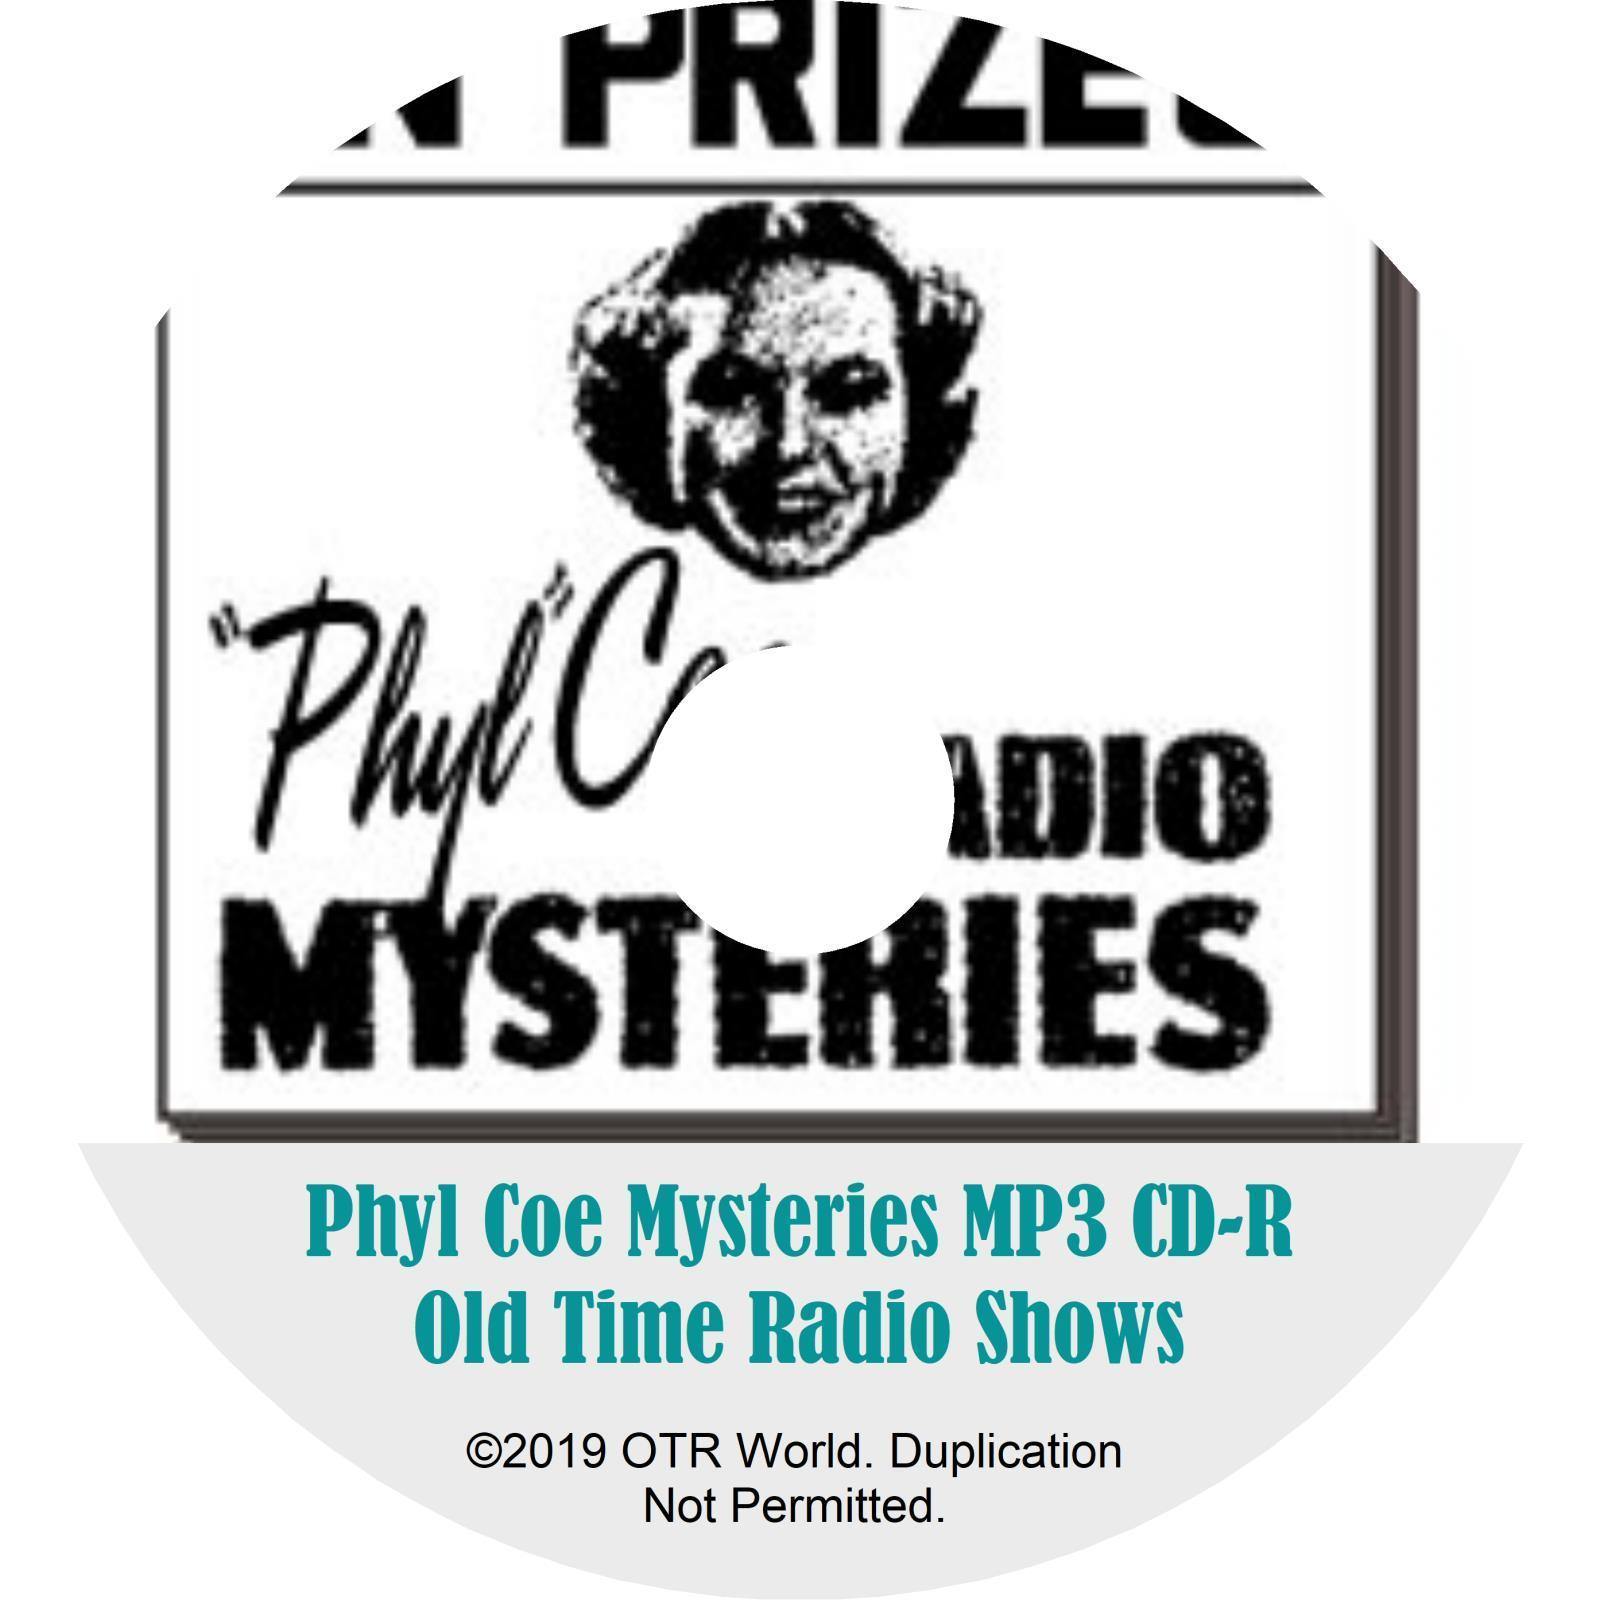 Phyl Coe Mysteries OTR Old Time Radio Shows MP3 On CD 12 Episodes - OTR World